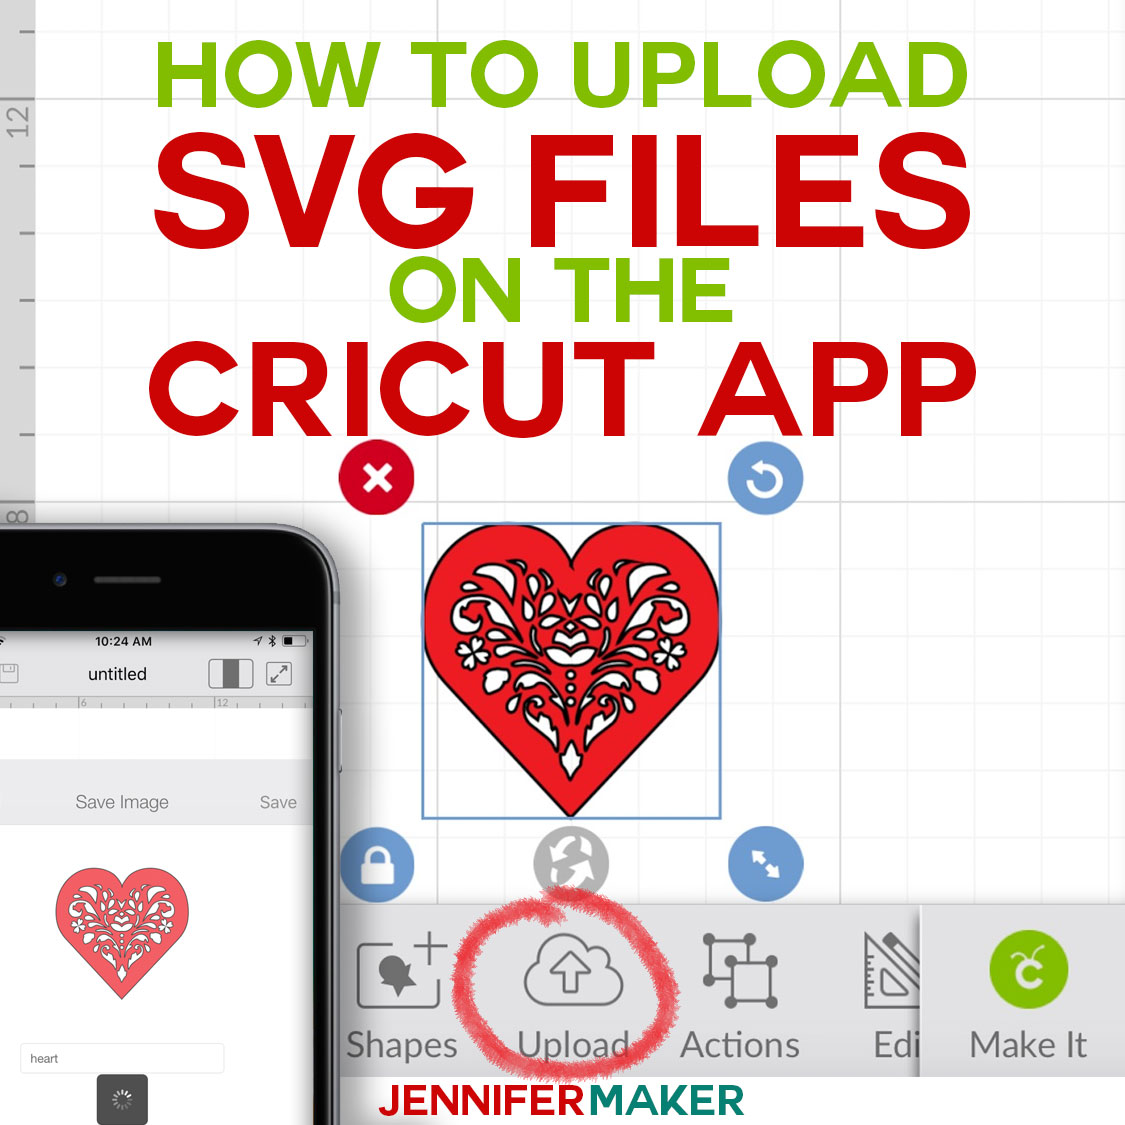 How to Upload SVG Files to Cricut Design Space on the iPhone and iPad | Save Images to Cricut App on Mobile #cricut #svgfile #tutorial